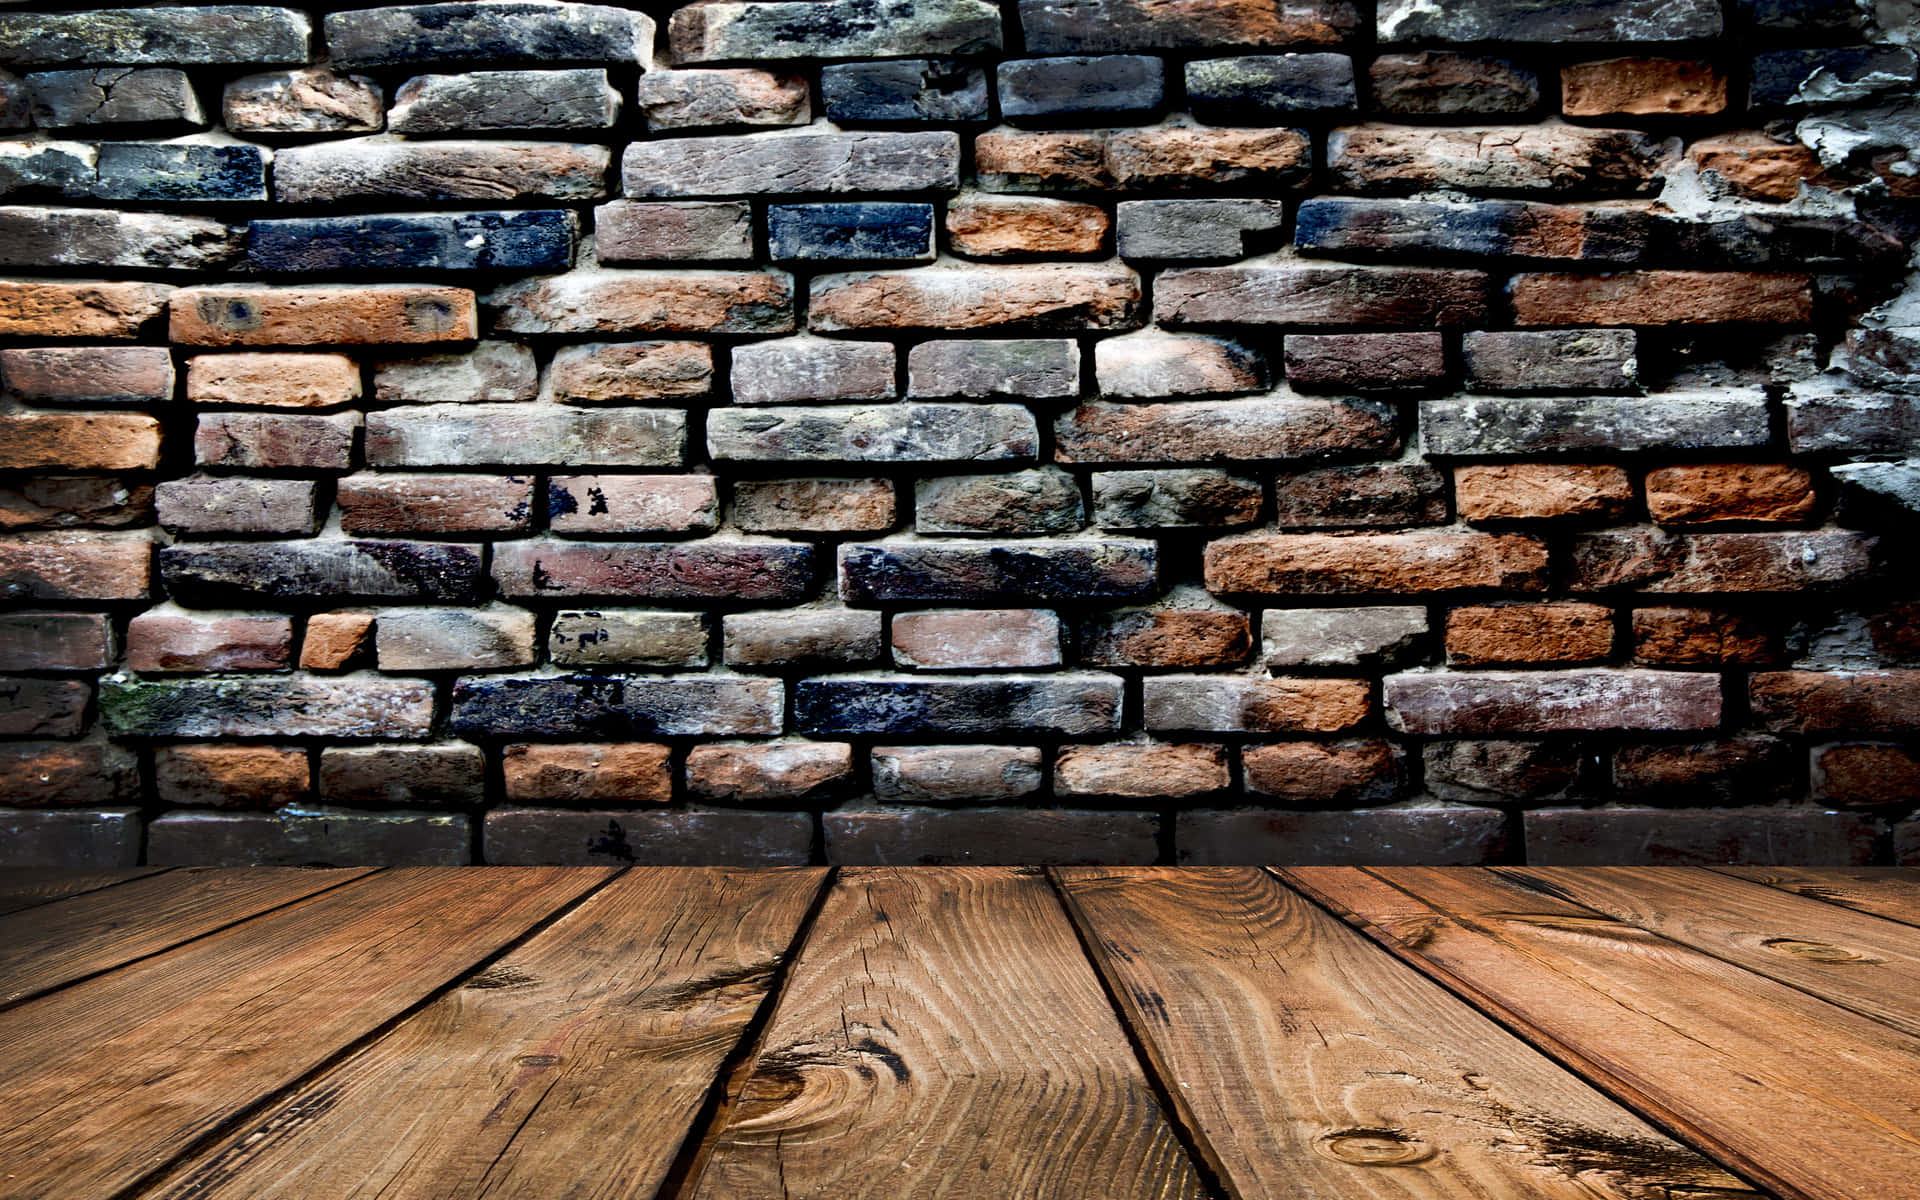 An Old Brick Wall With Wooden Floor